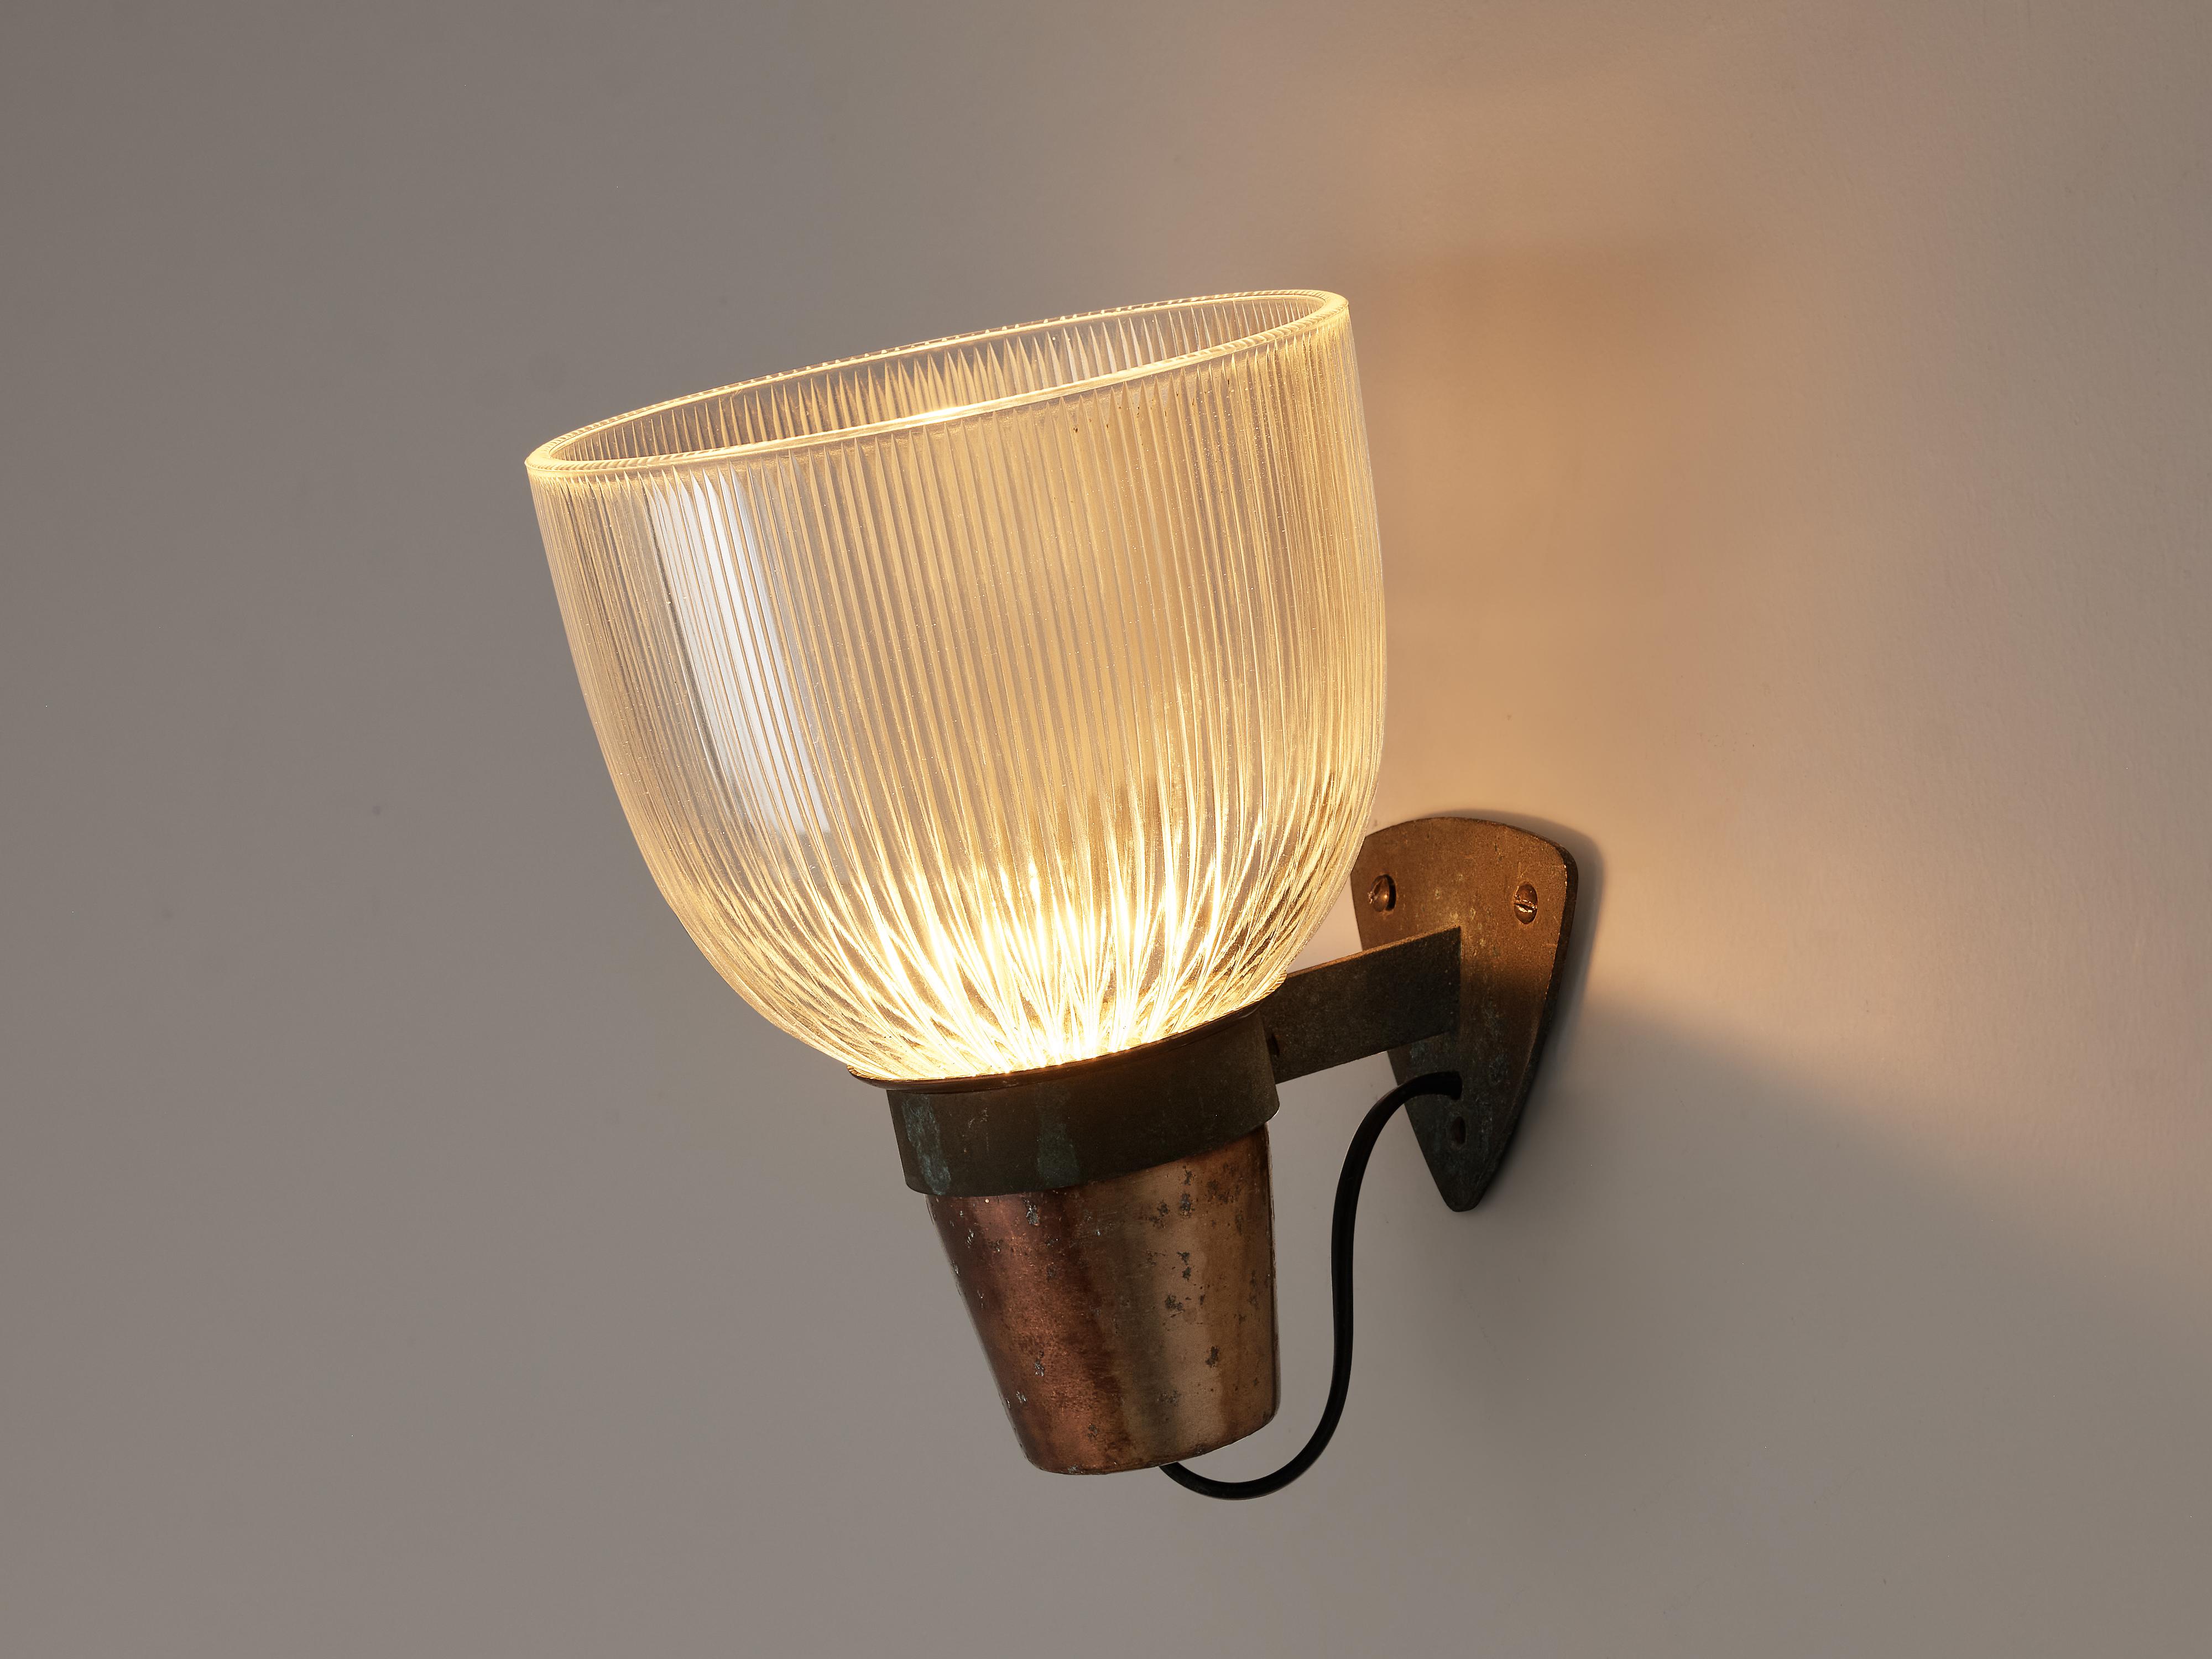 Ignazio Gardella for Azucena, pair of wall lamps model 'LP5', copper, metal, structured glass, Italy, 1954

Wall lights model ‘LP5’ with shades in structured glass. From the triangular wall fixture a ring holds the lamp itself. The shade rests on a